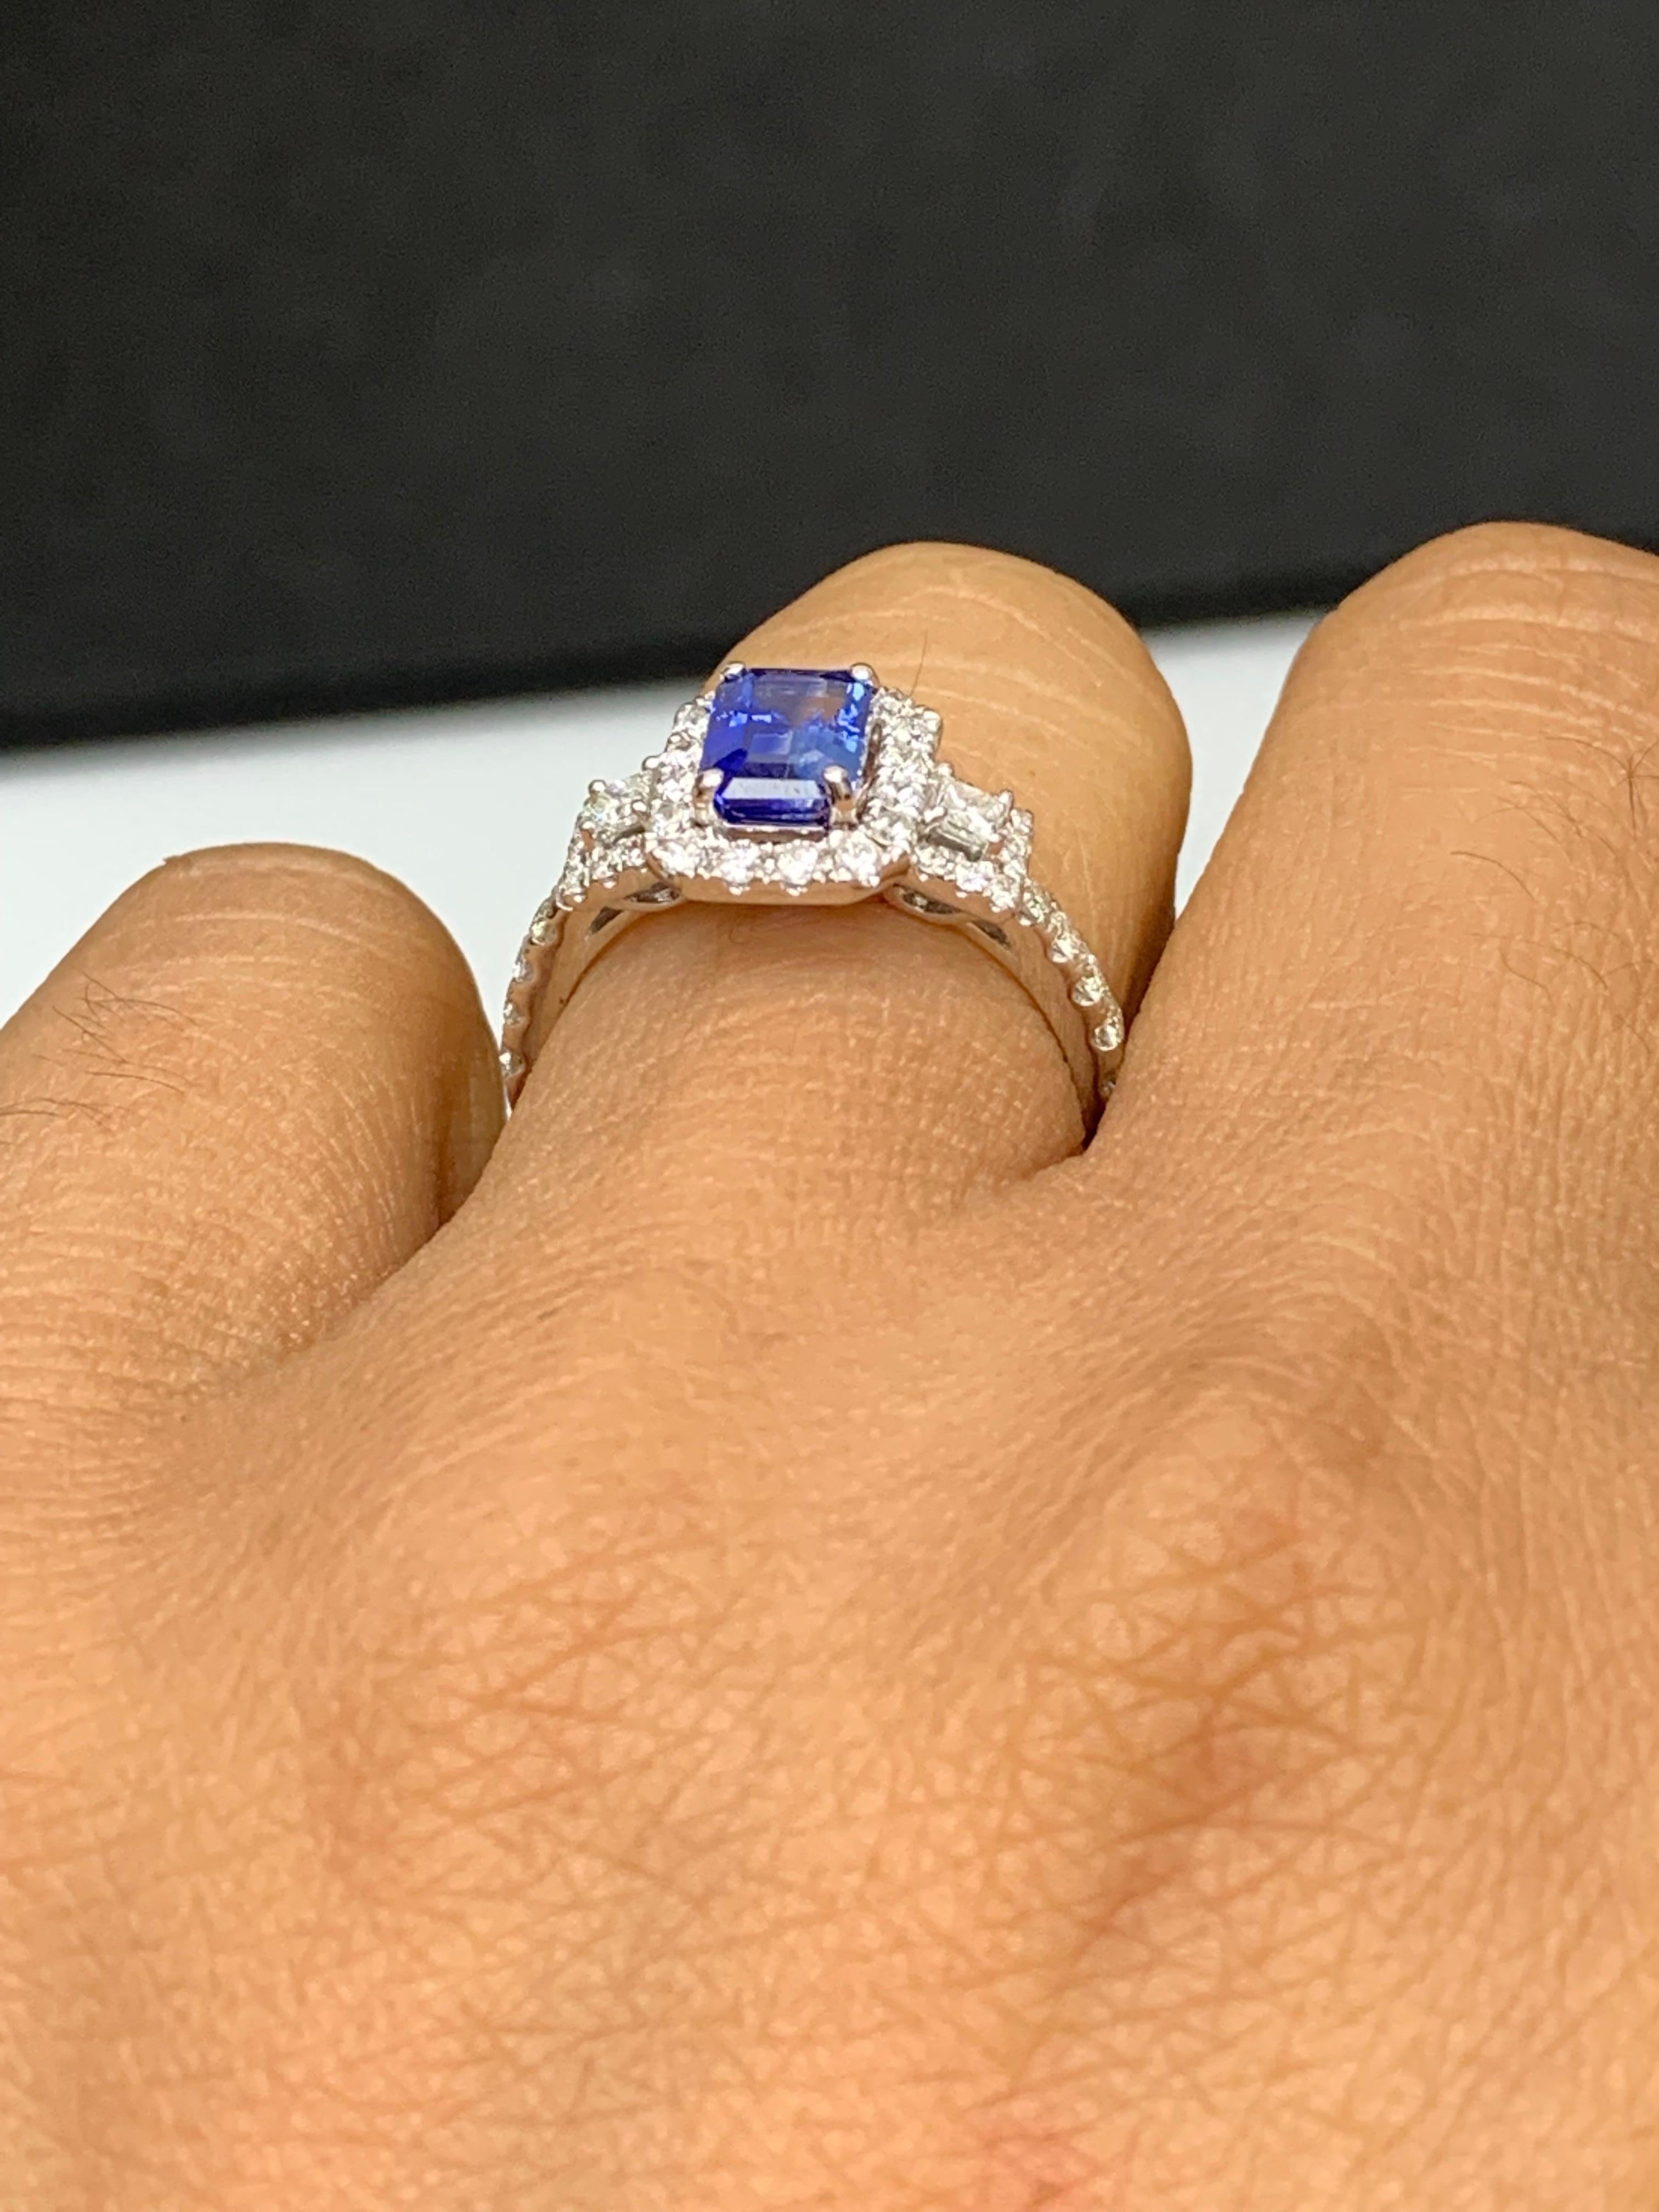 Modern 1.21 Carat Emerald Cut Blue Sapphire and Diamond Halo Ring in 18K White Gold For Sale